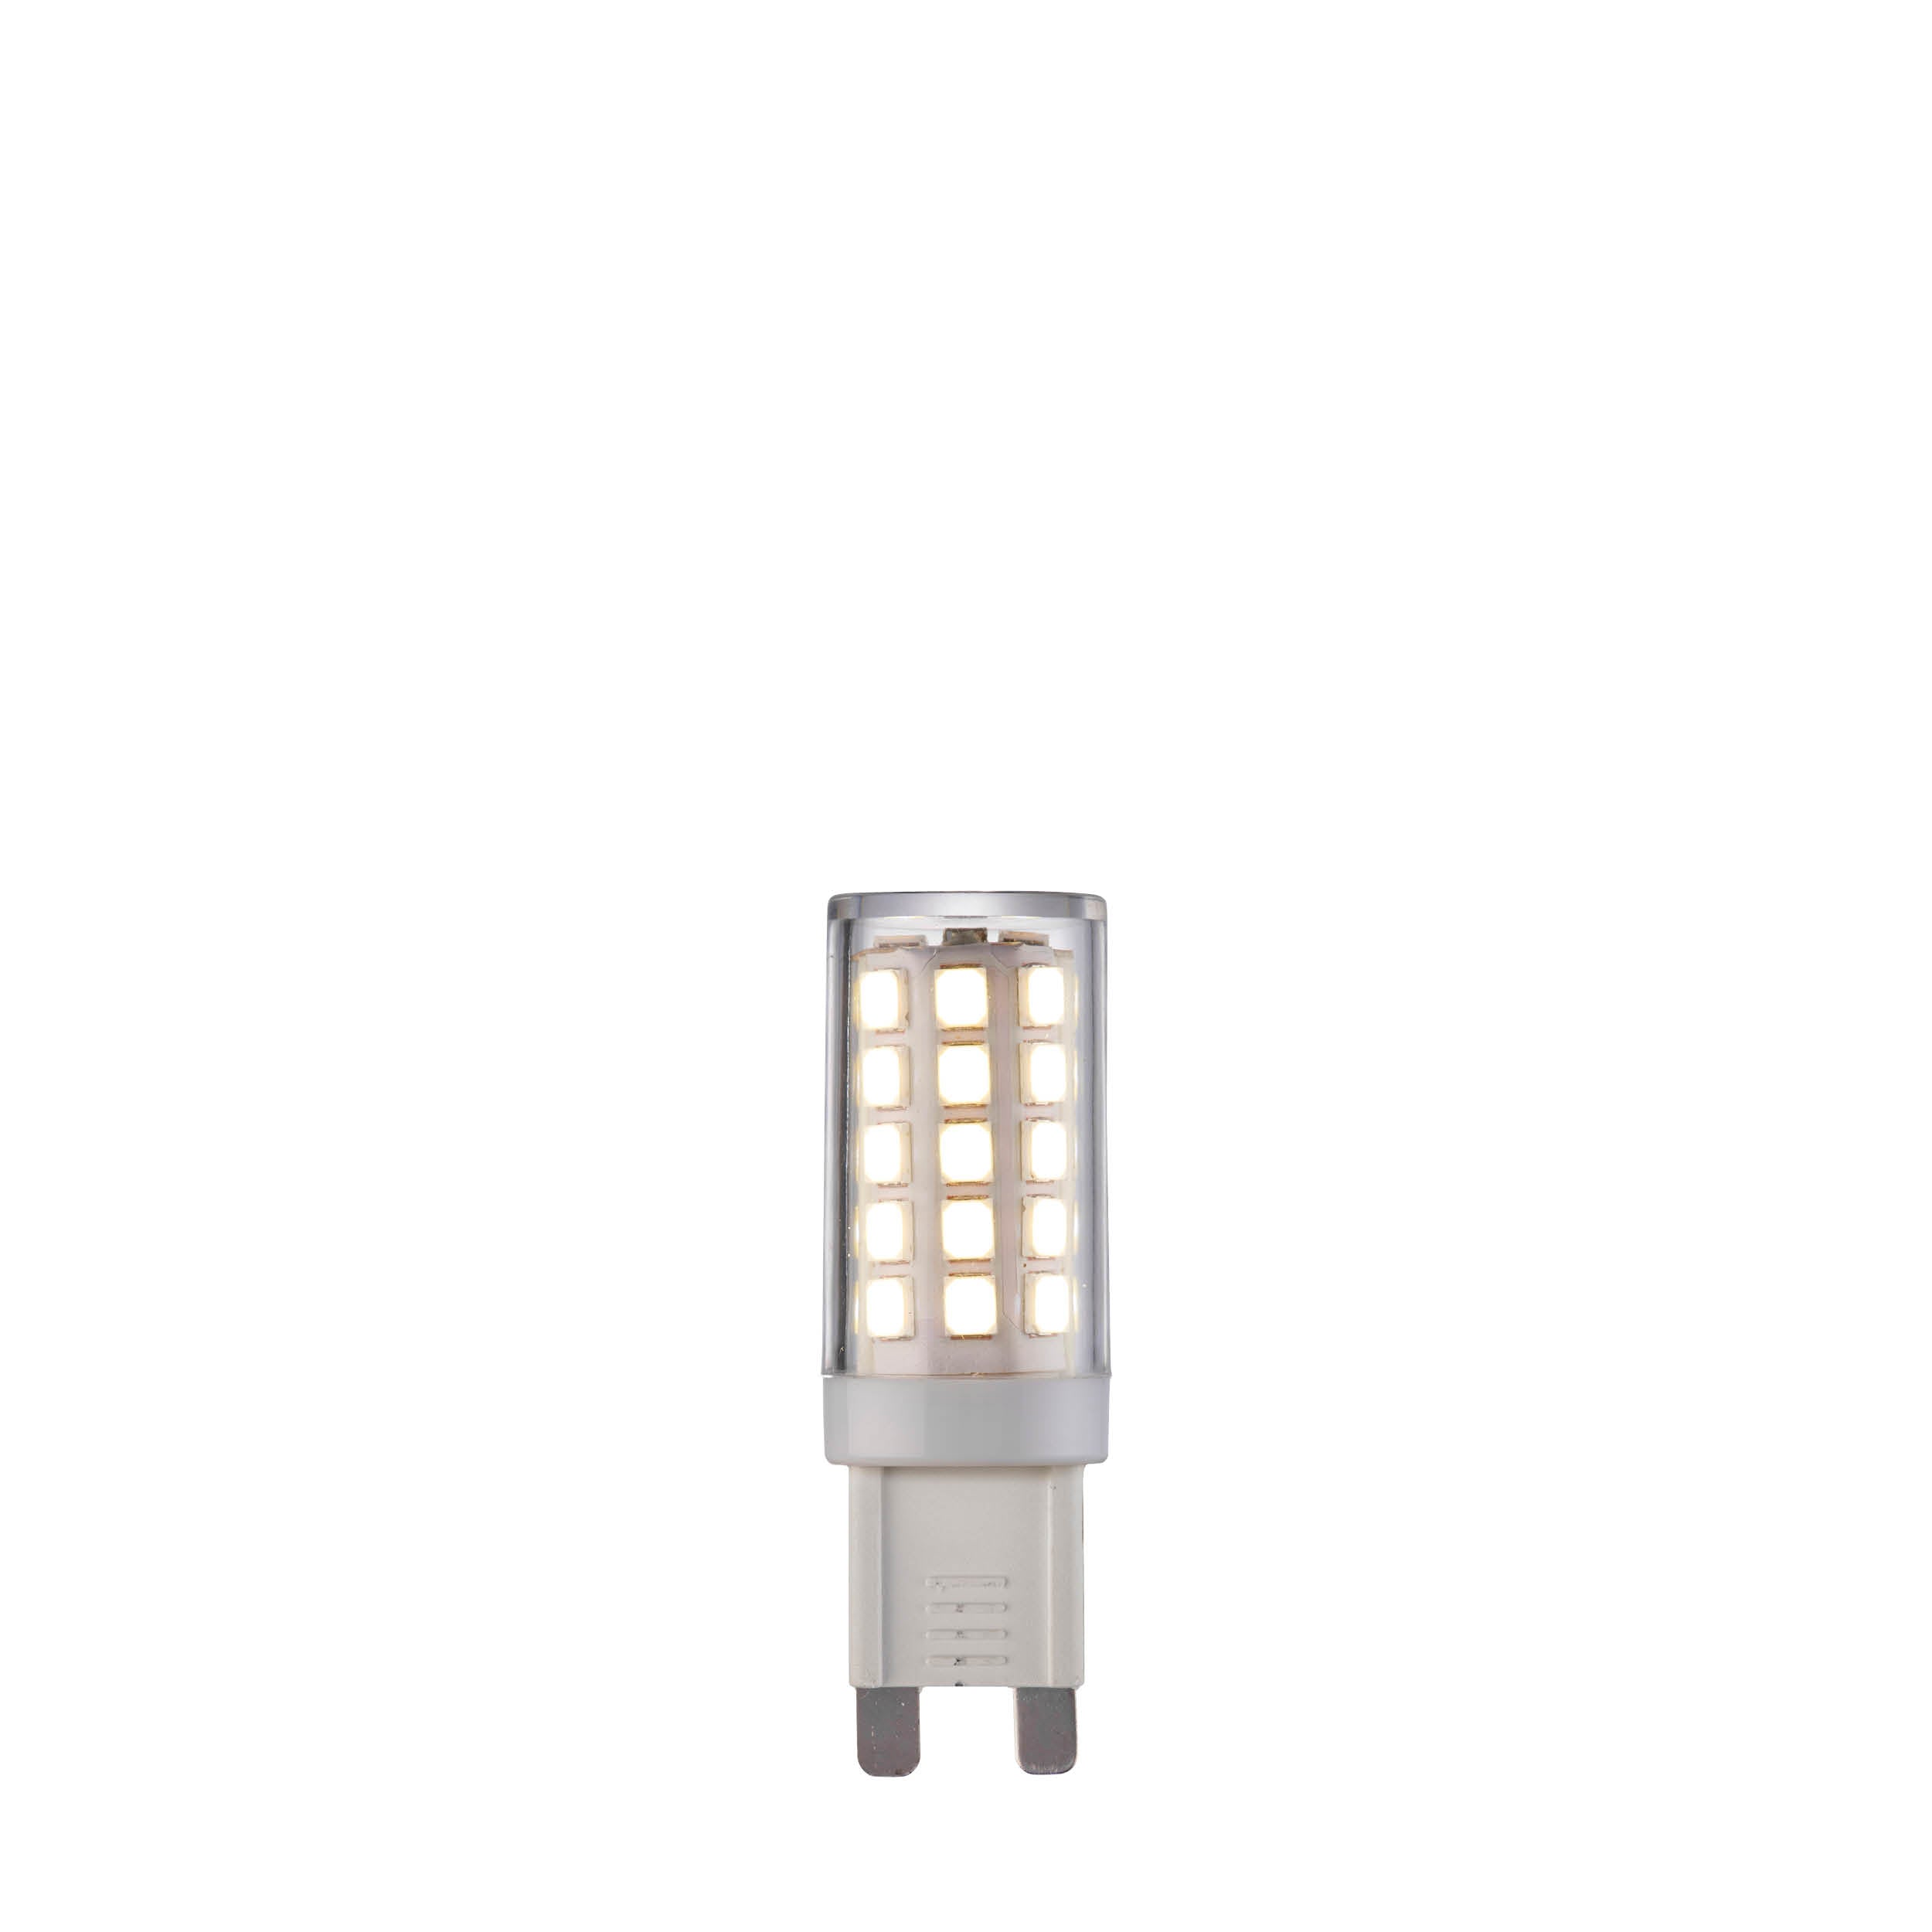 G9 LED bulb capsule. Cool White 4000K 3.5W 400lm. Non-Dimmable